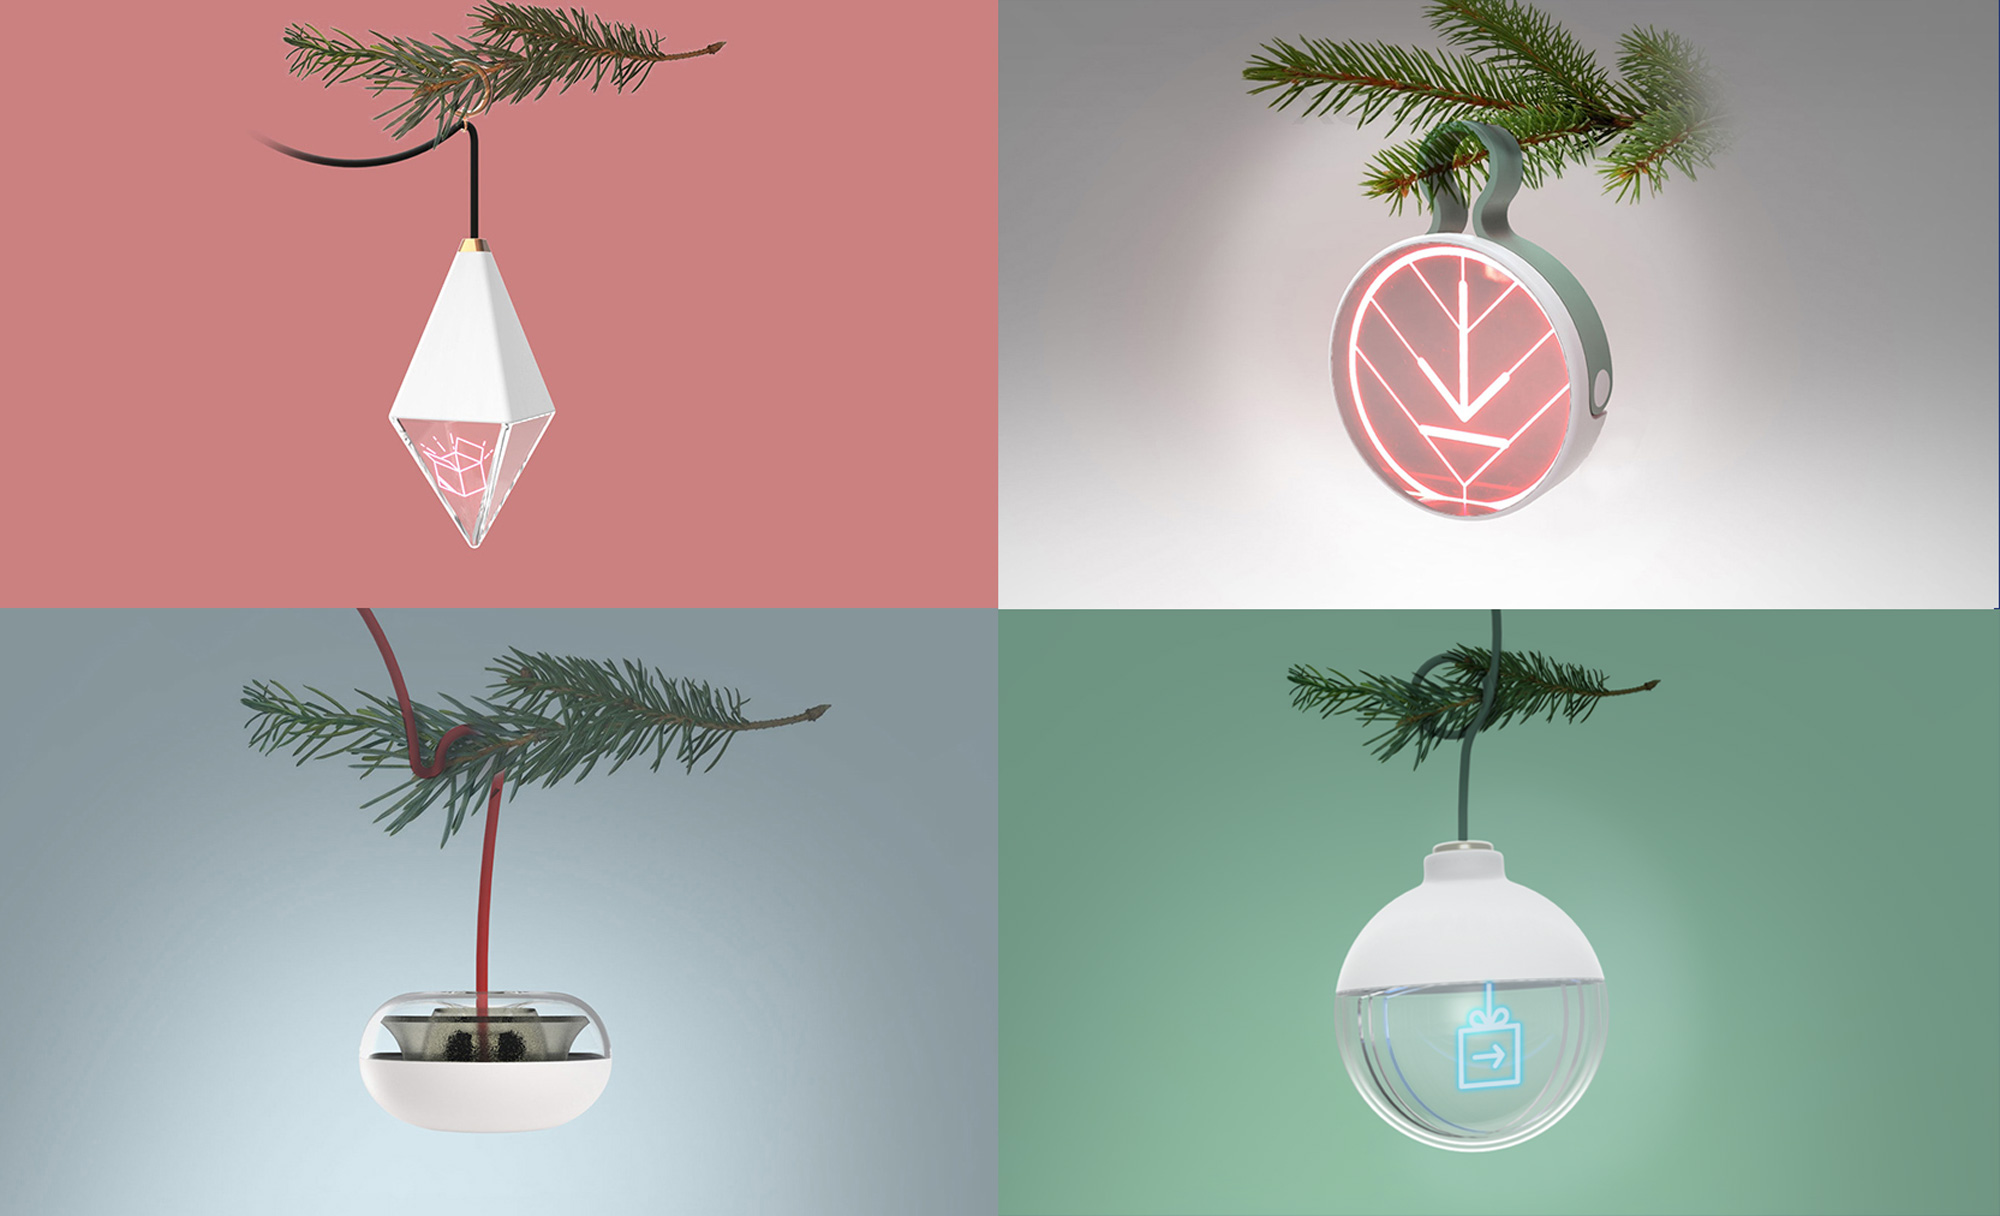 The Most Wonderful Ornament - Enhancing the Joy of Gift Giving